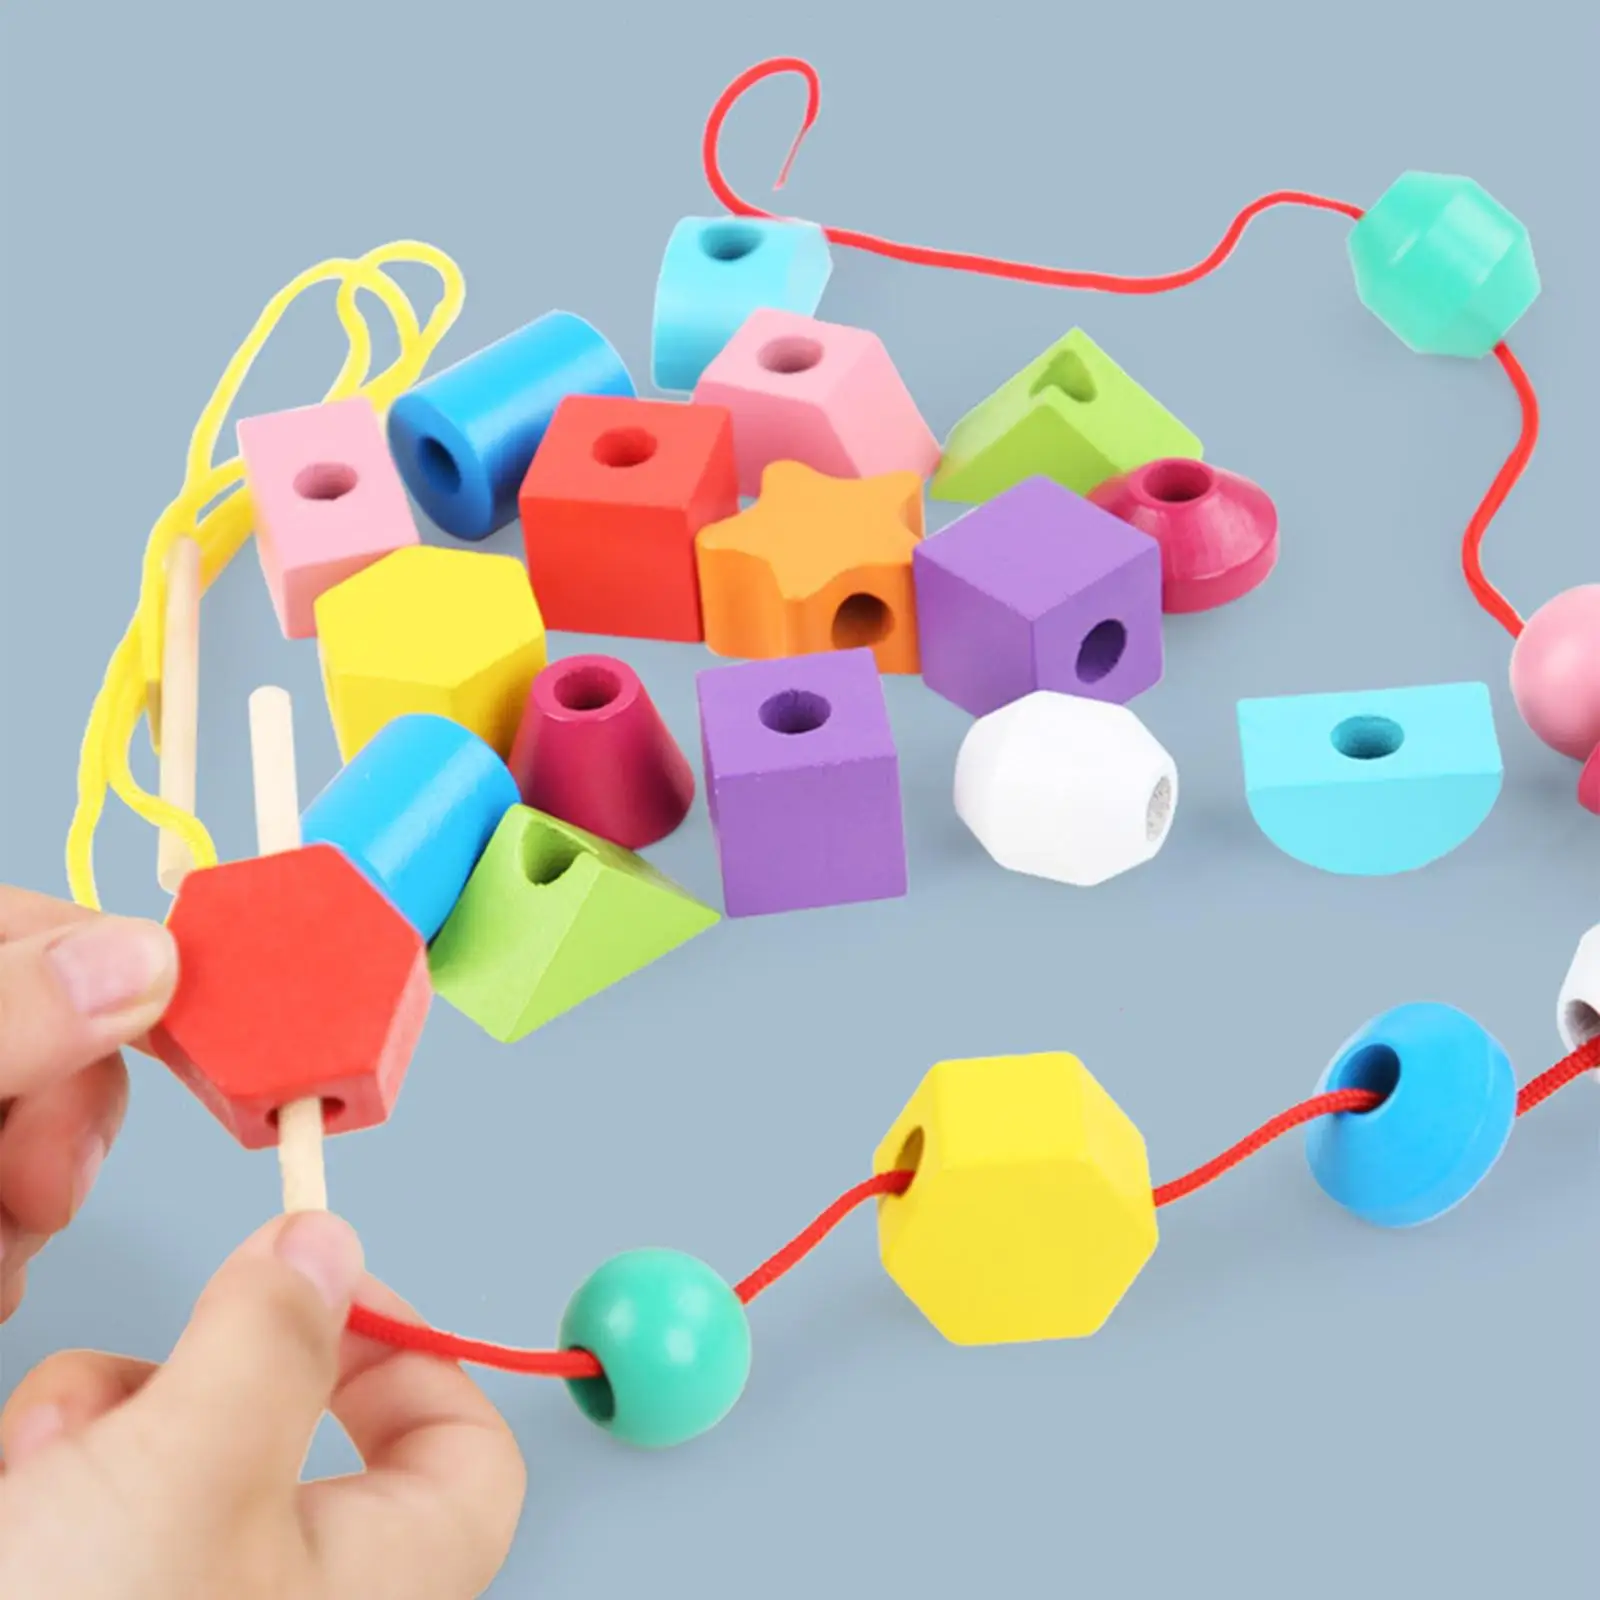 Five Sets Beaded Toys Blocks Educational Colorful Learning Wooden Sensory Toy Monterssori Toy for Toddlers Preschool Children